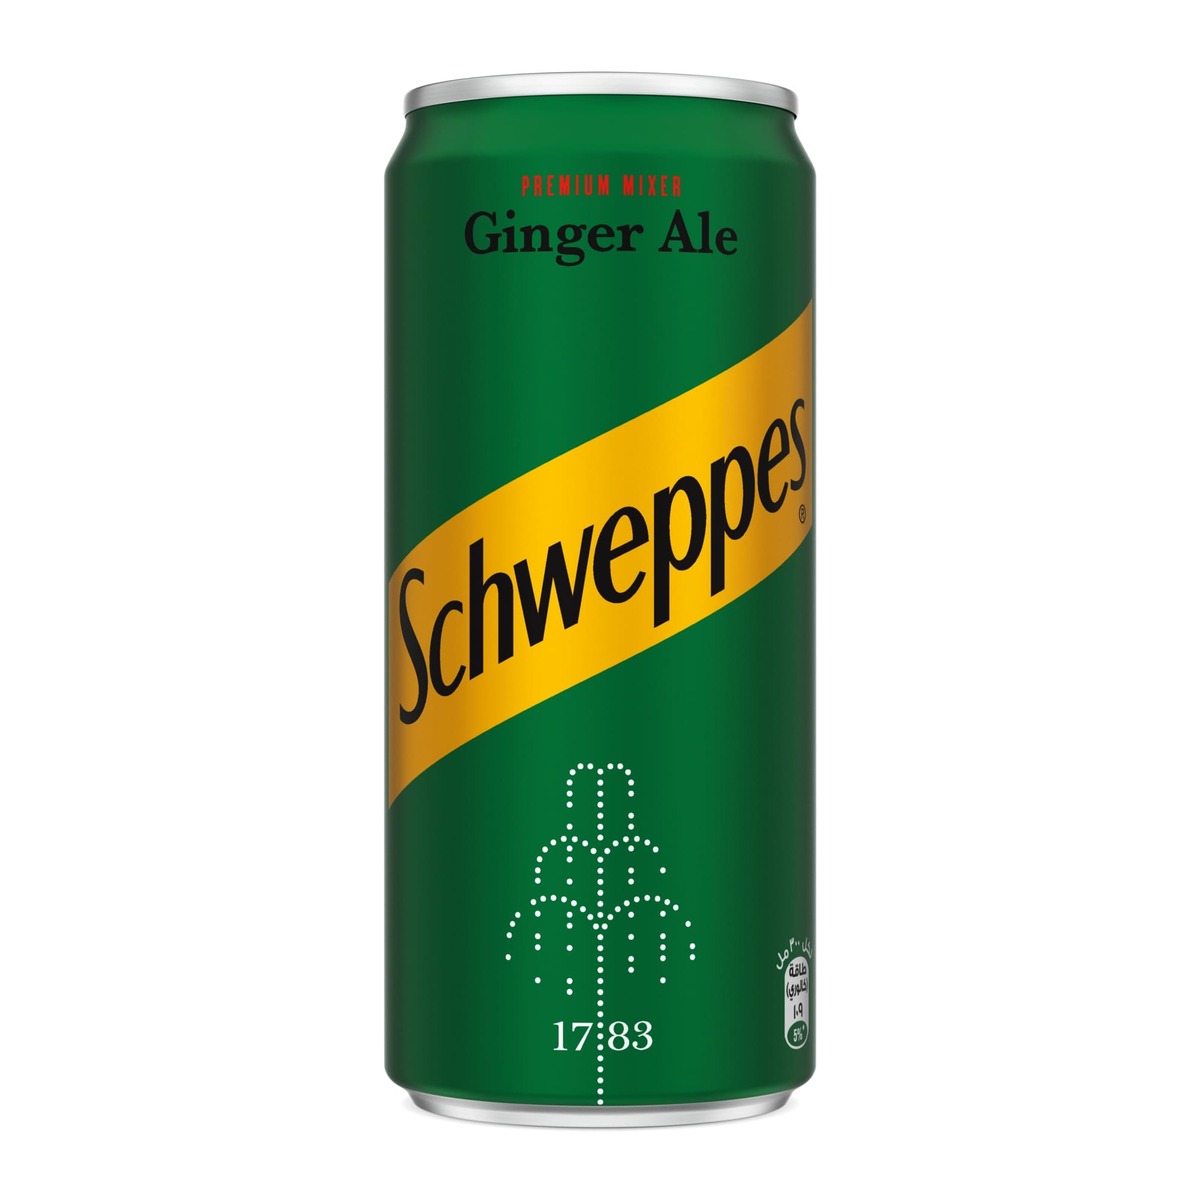 Schweppers Ginger Ale 6 x 300 ml